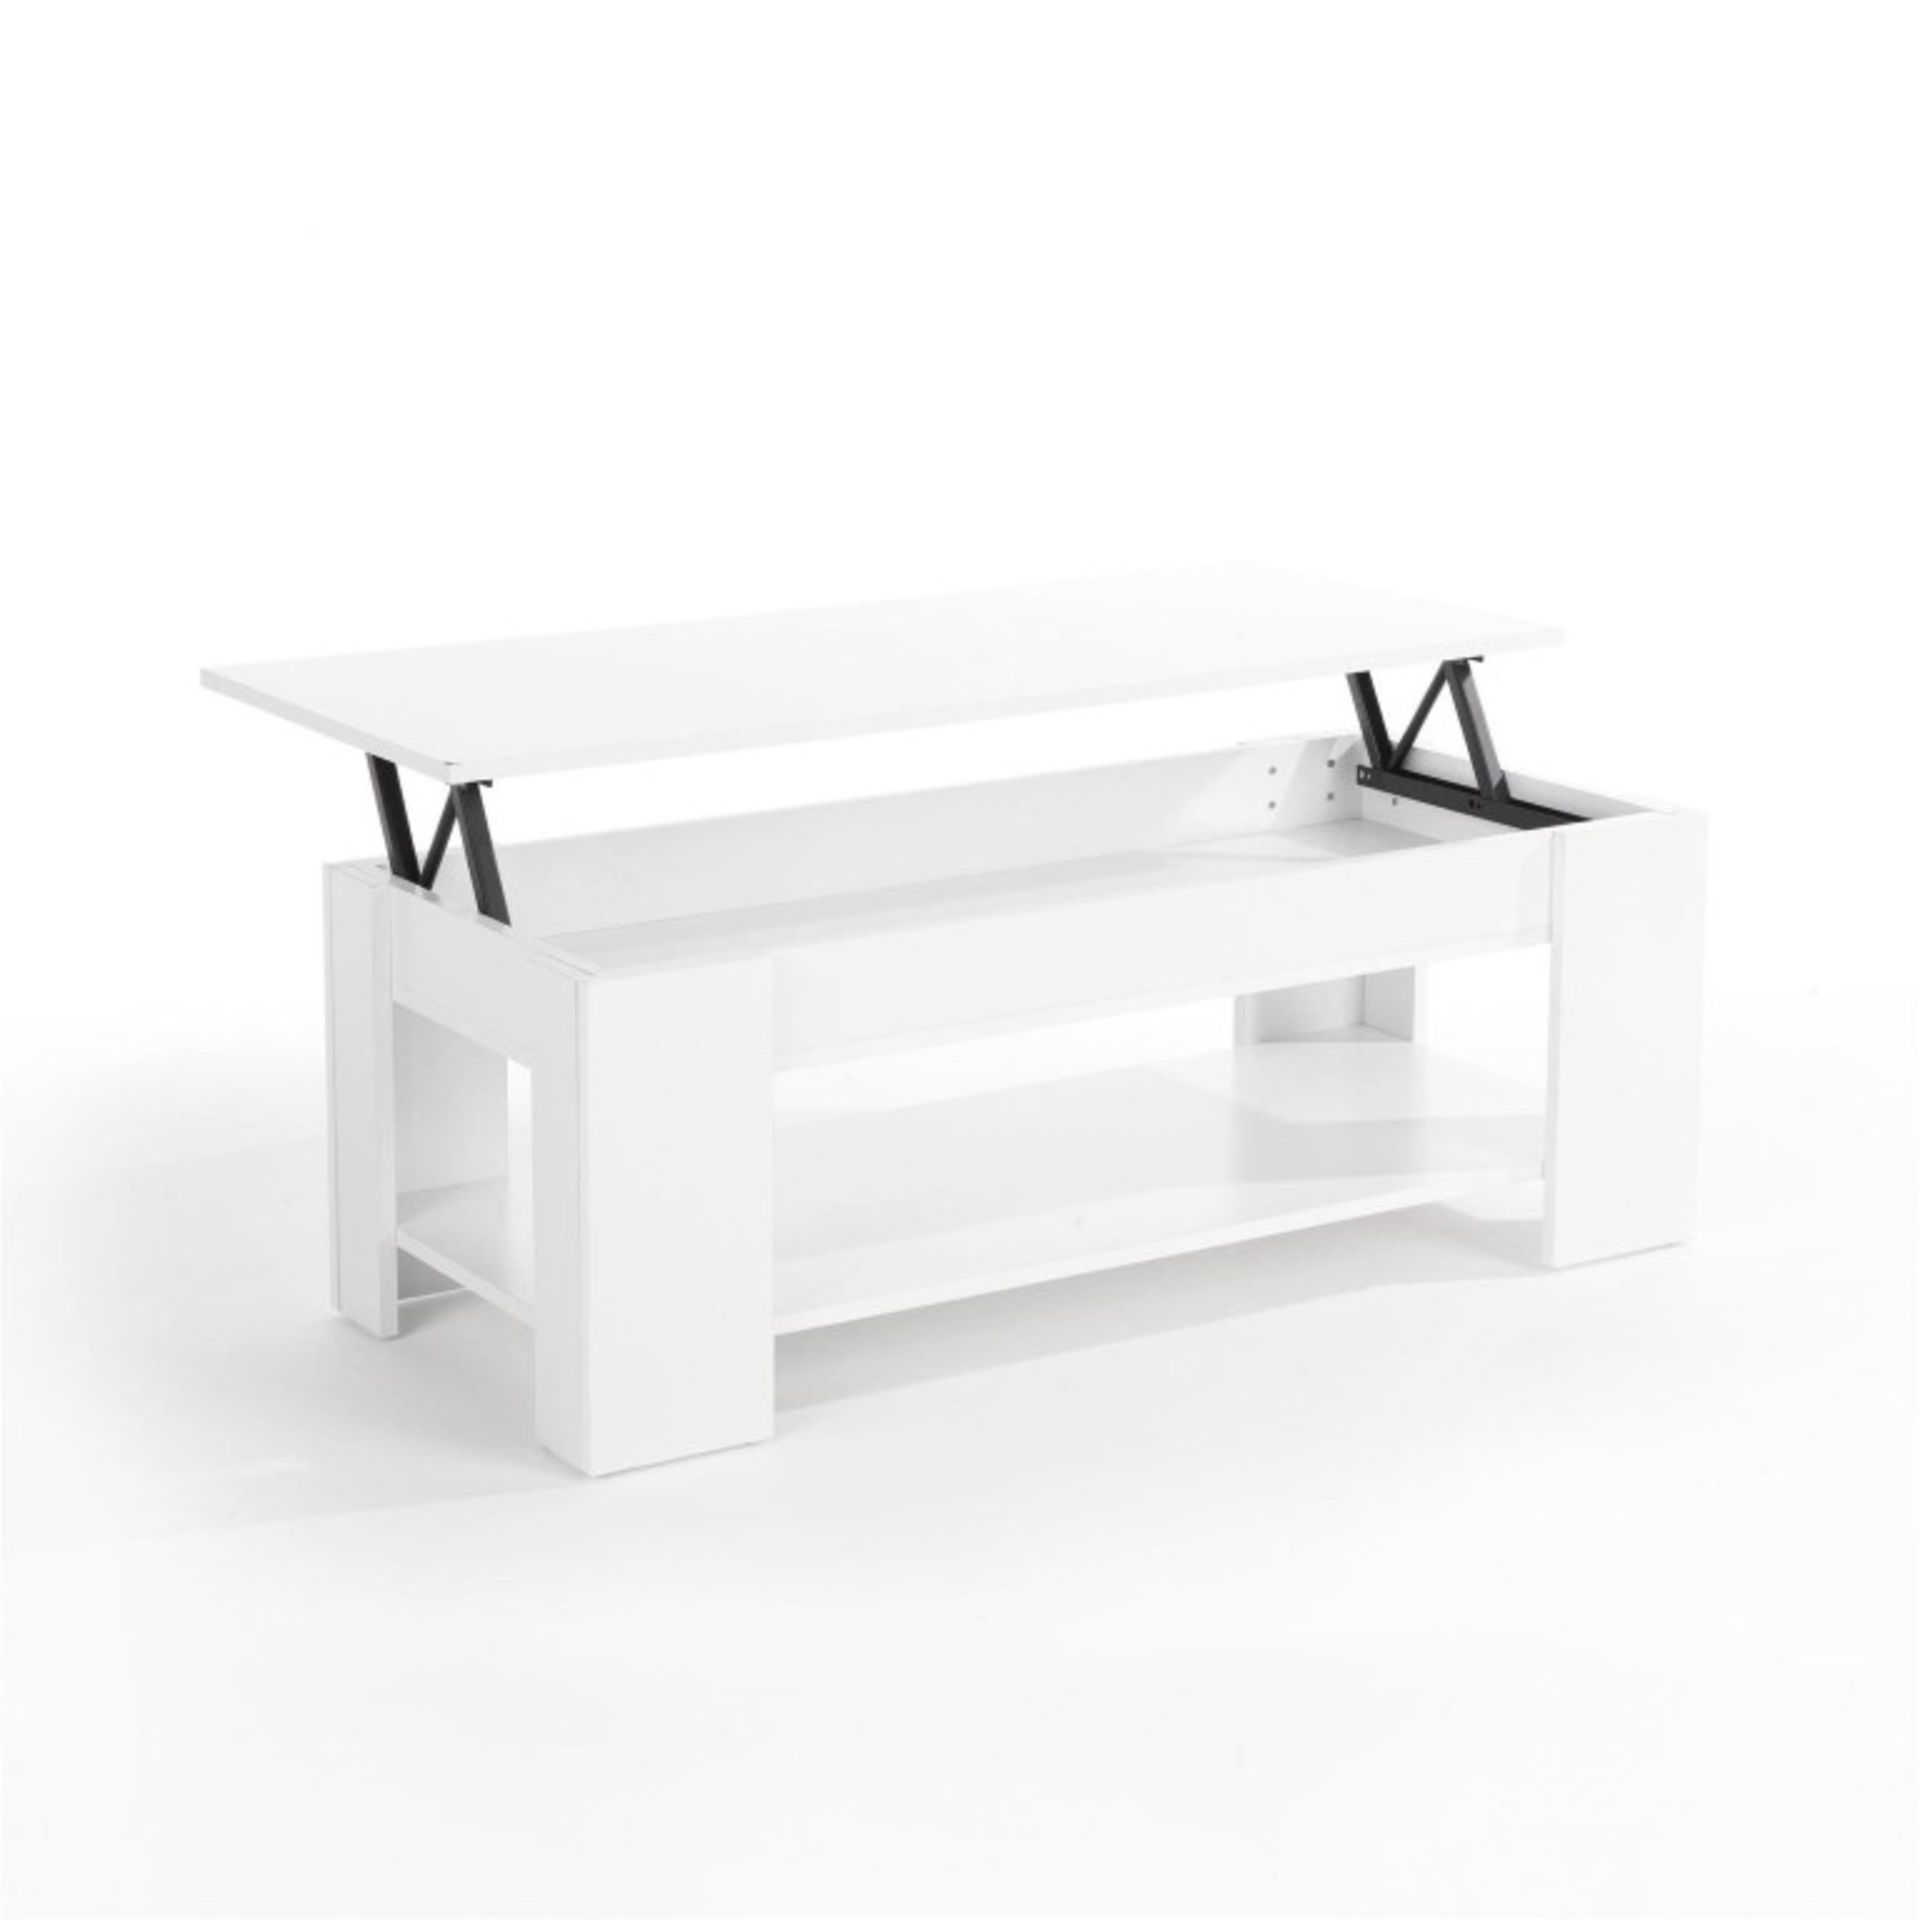 1 x "Caspian" Lift Up Top Coffee Table with Storage - Colour: WHITE - Sleek Modern Design - - Image 2 of 2